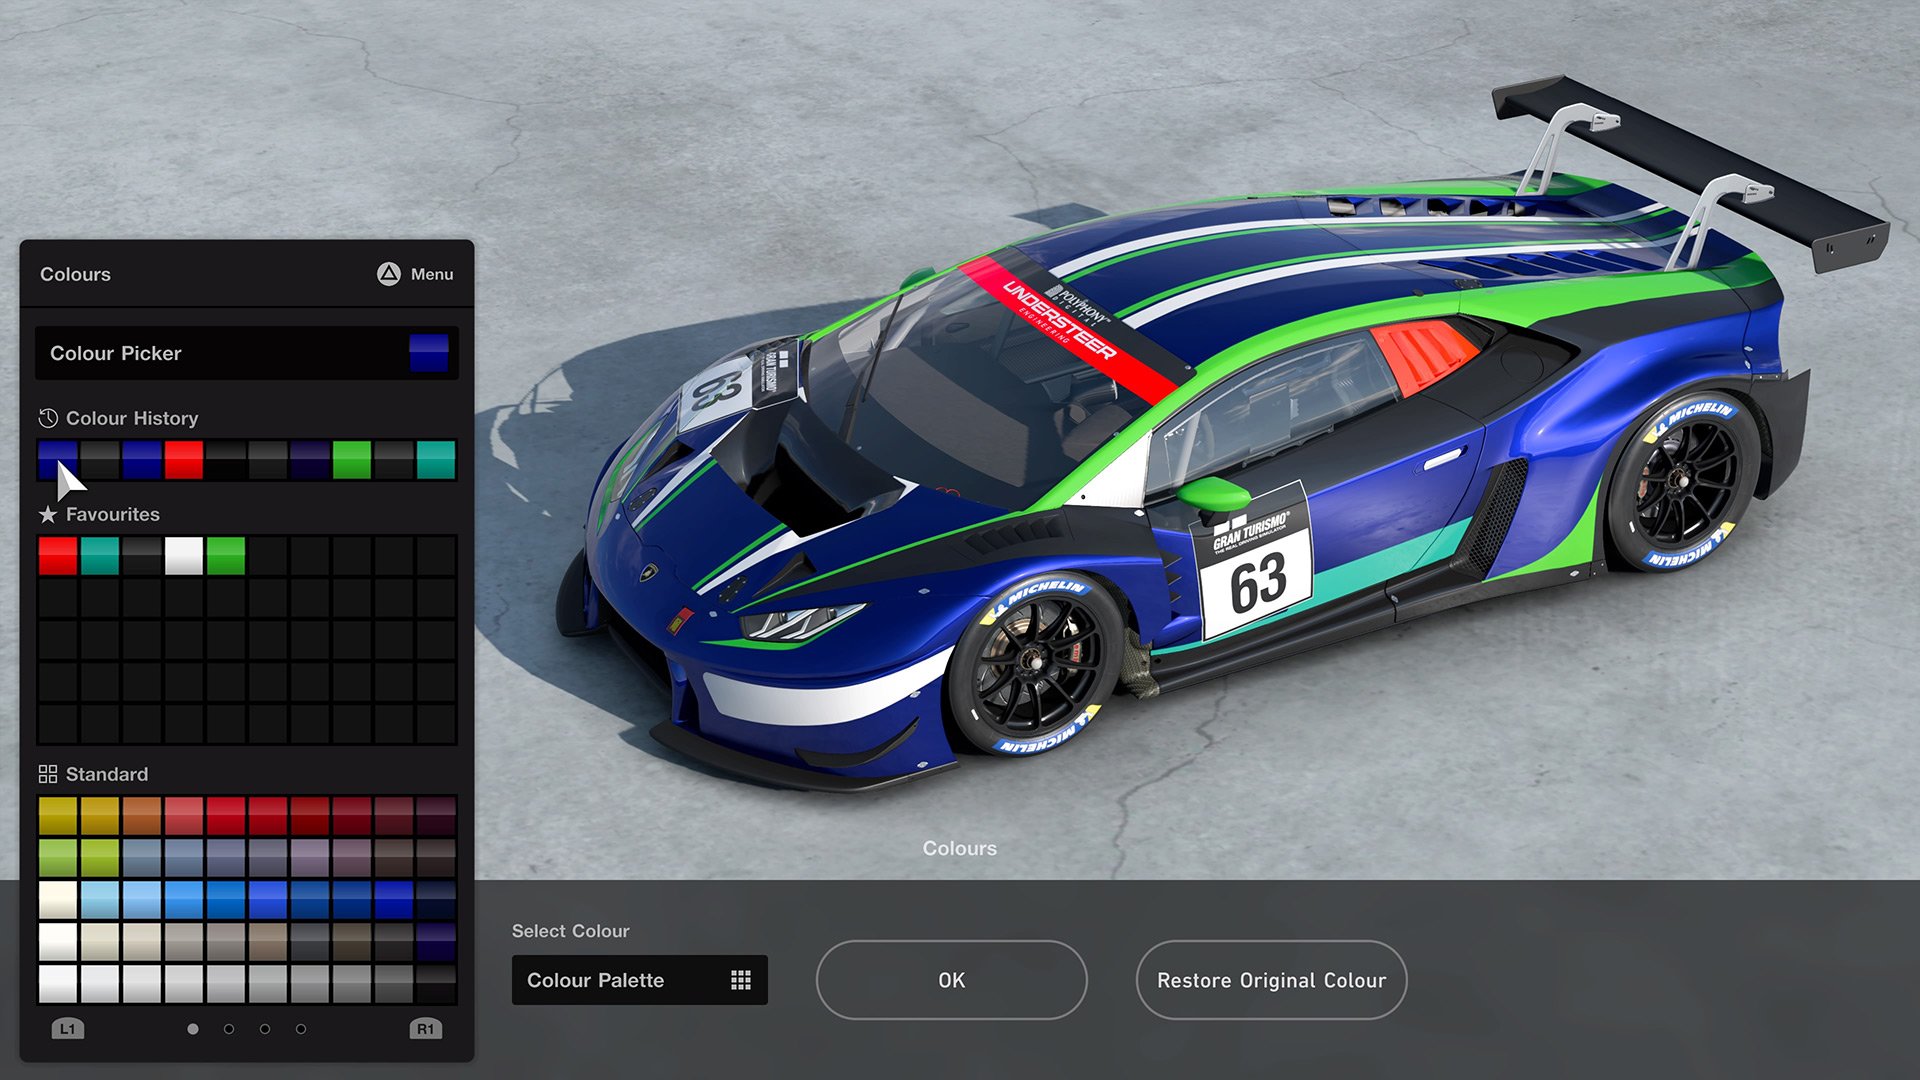 How to import and utilize custom decals into Gran Turismo 7